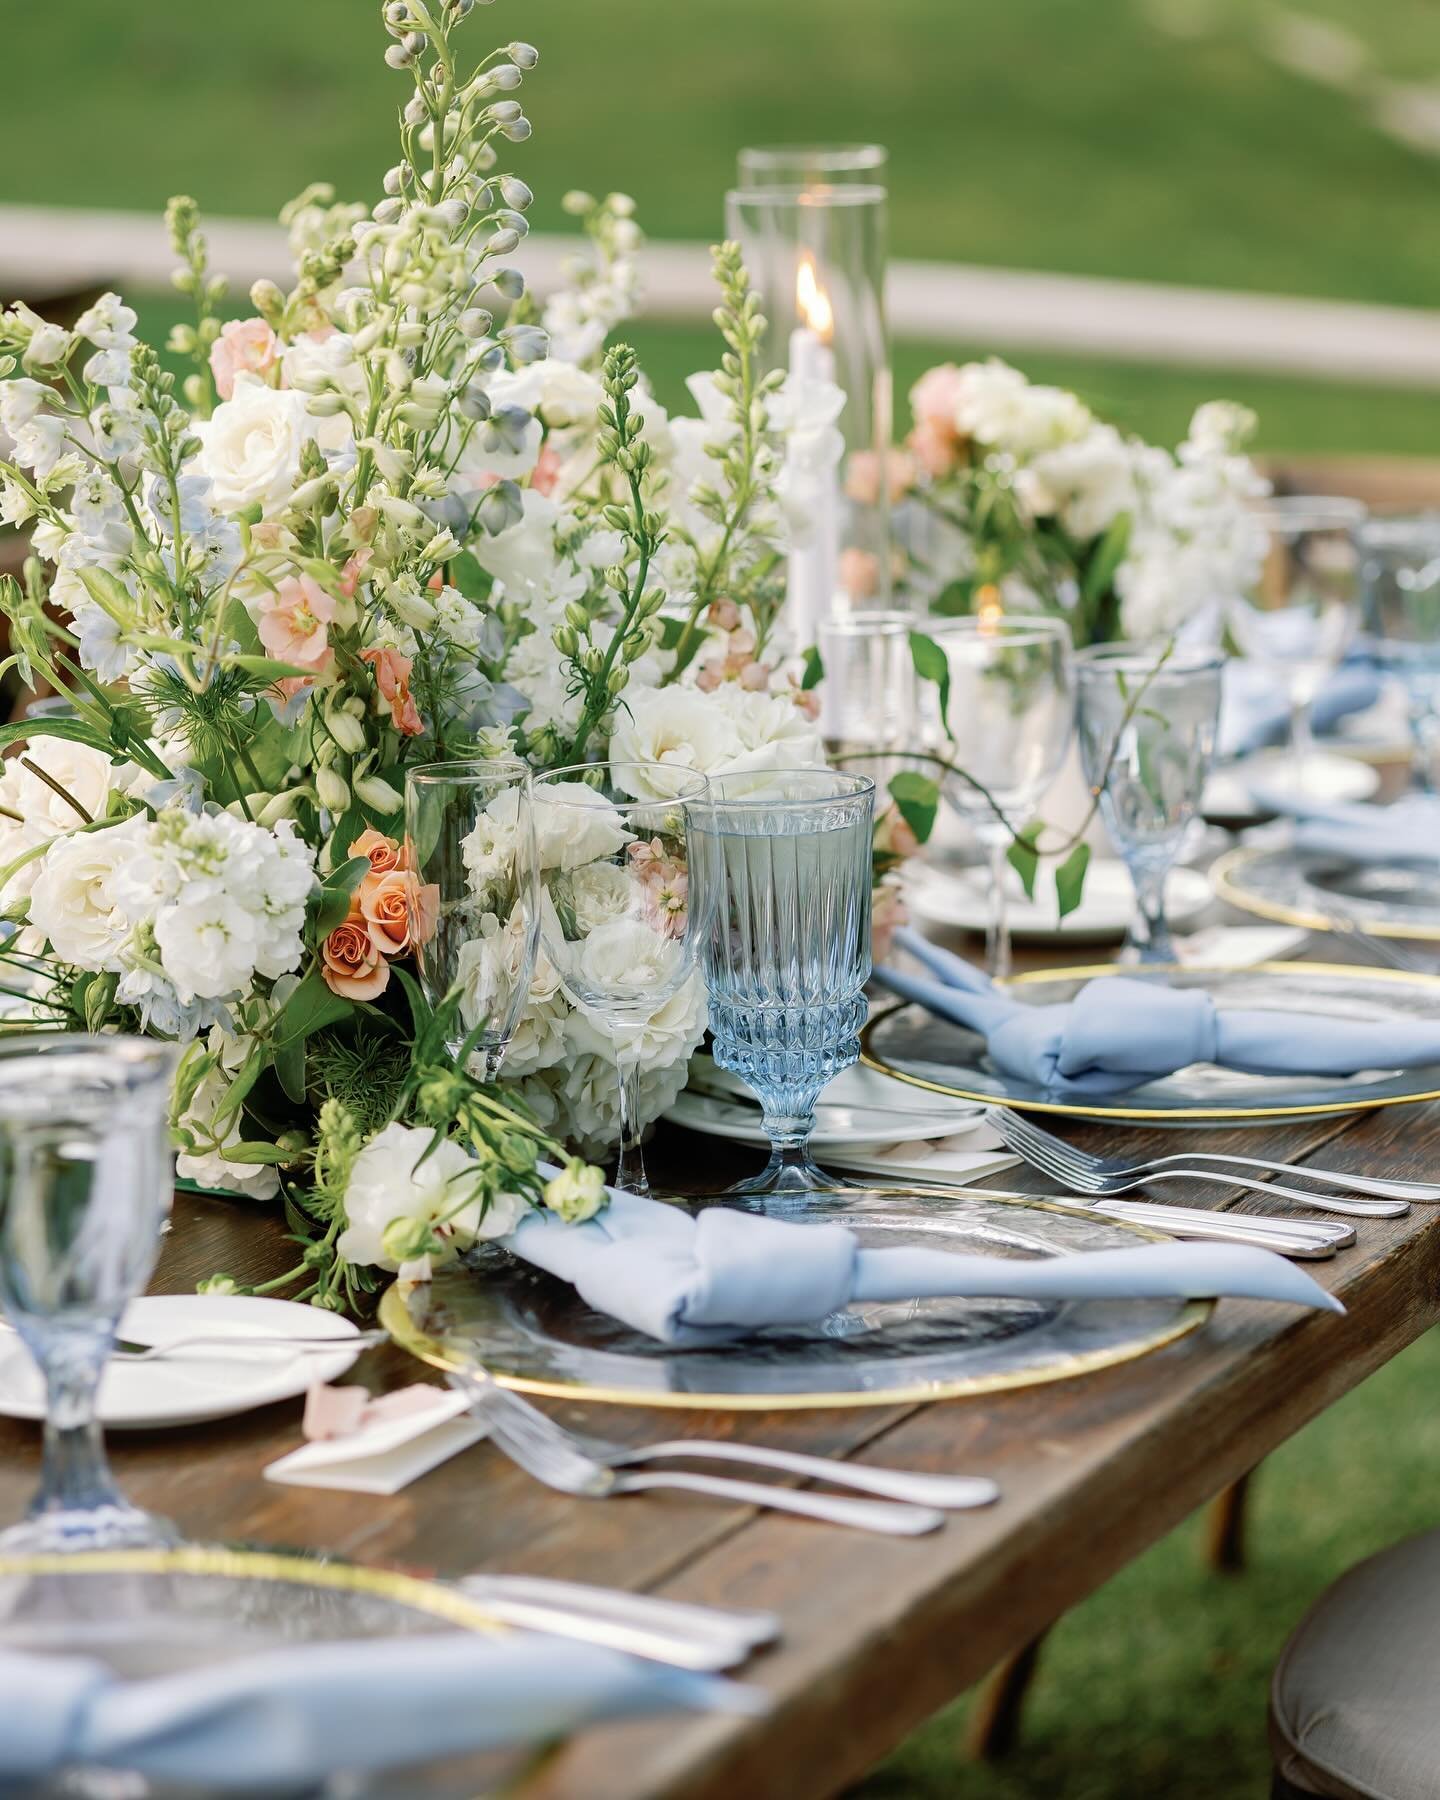 The blue glassware, gold chargers and brilliant florals make the entire table design really pop! 💙 Always a lovely time at the Stonehouse!

Venue: @tciweddings 
Planner: @caitlin_everlybymge @everlybymge 
Photography: @lisettegatliff 
Floral Design: